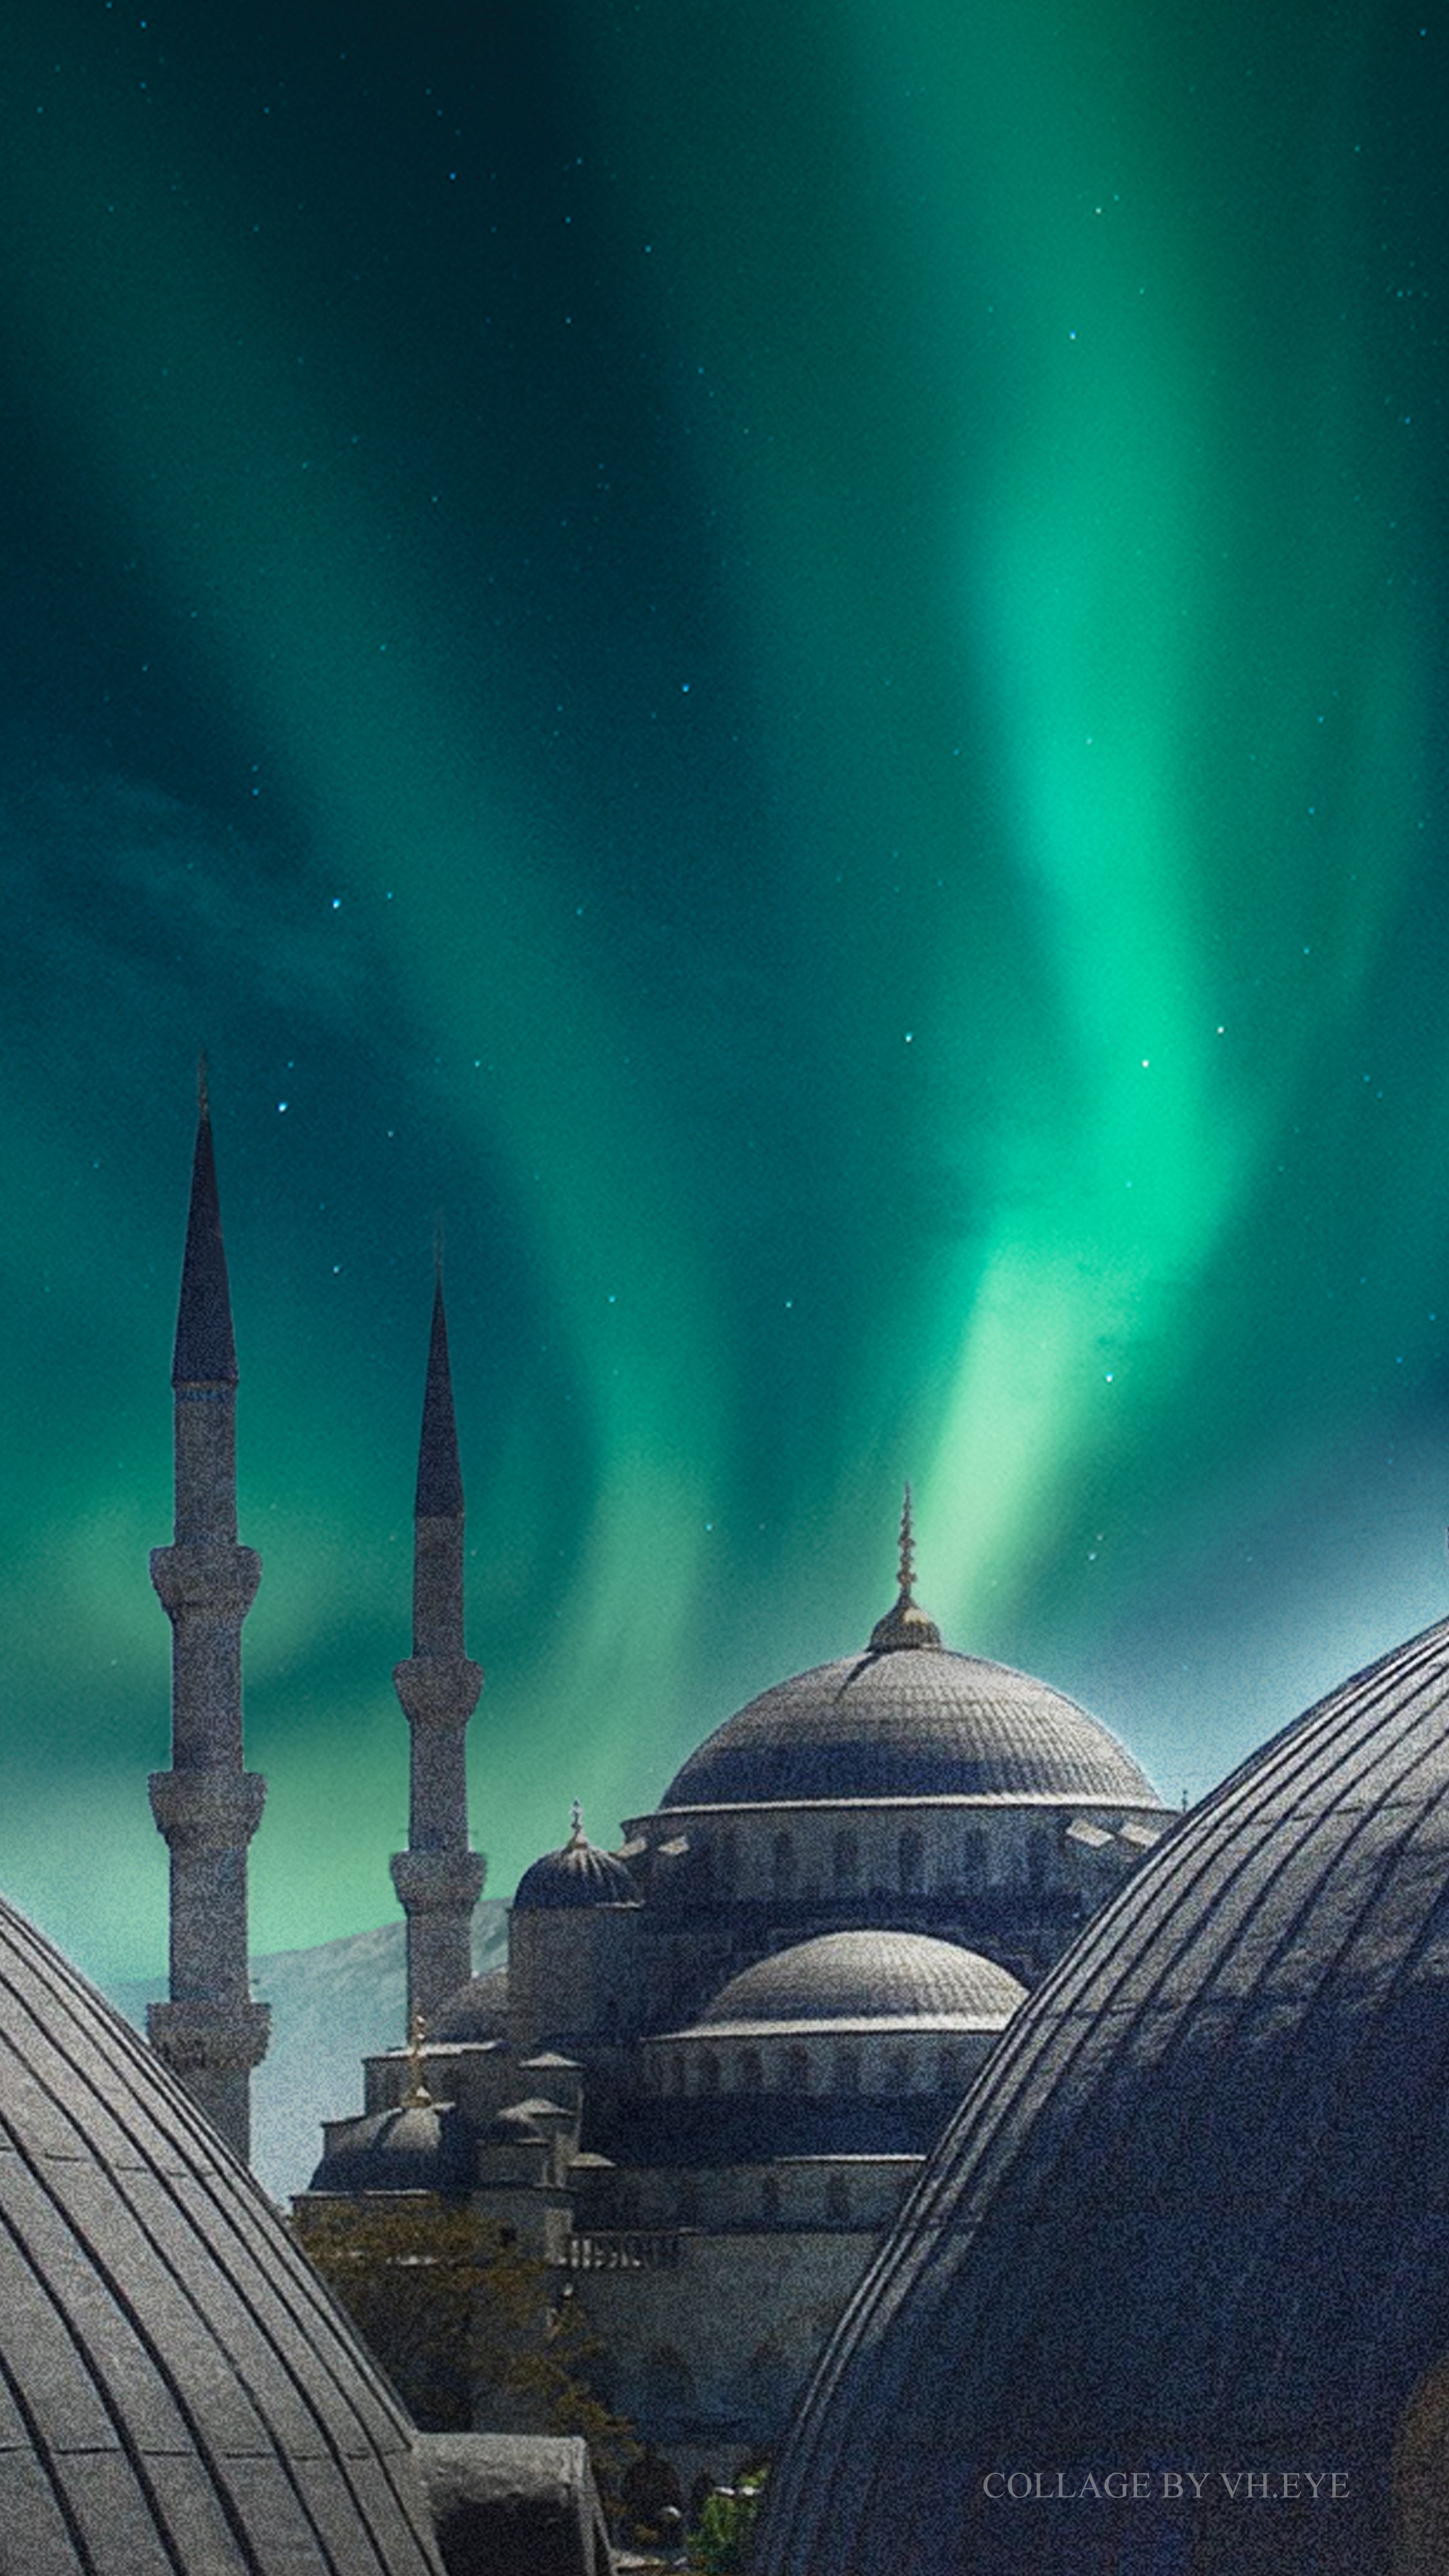 Sultan Ahmed Mosque Wallpapers